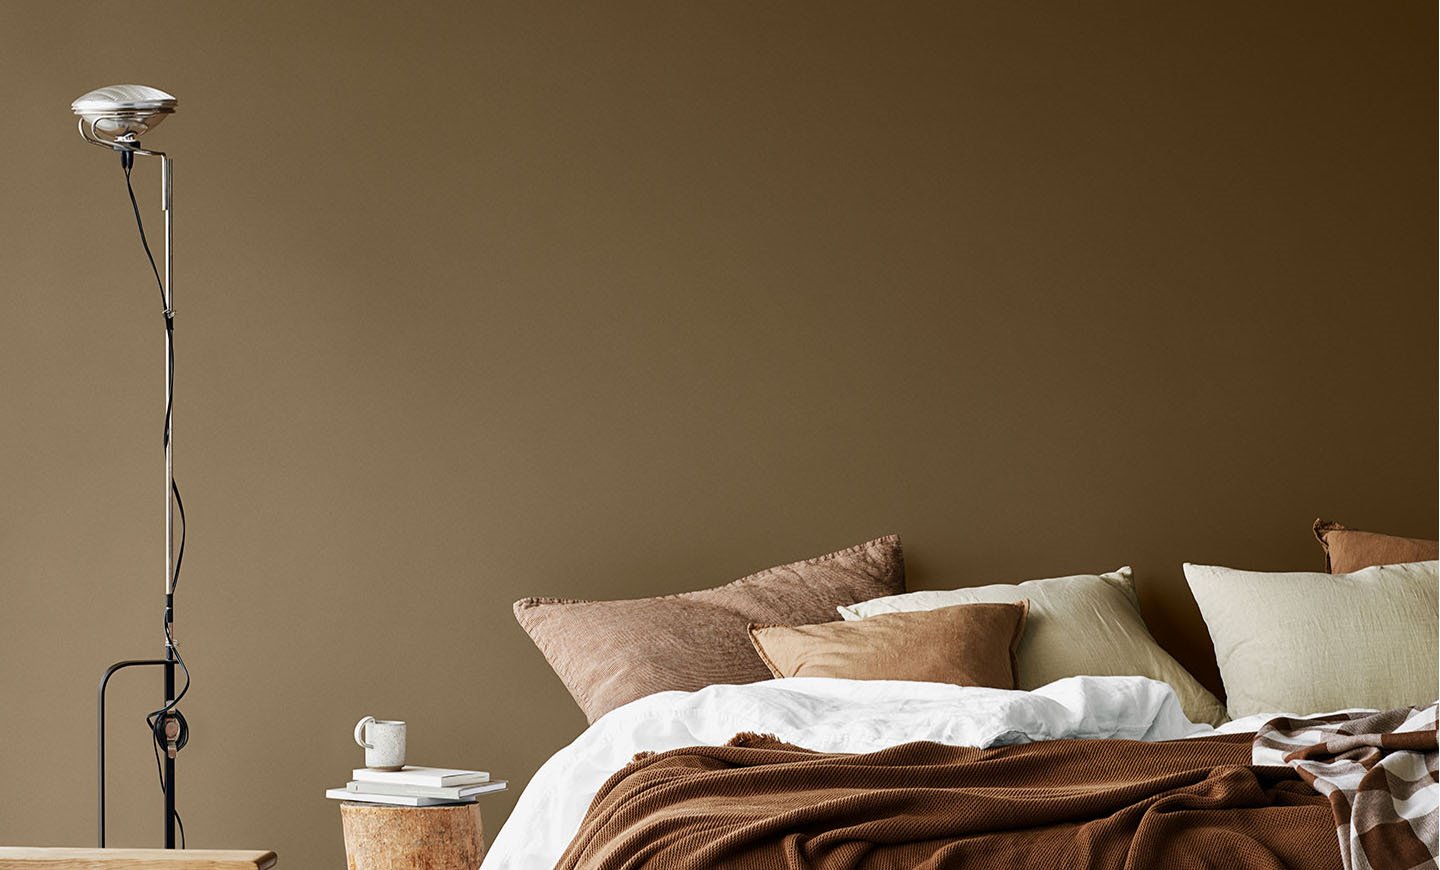 Bedroom in tan beige and brown.  contrast of opinions